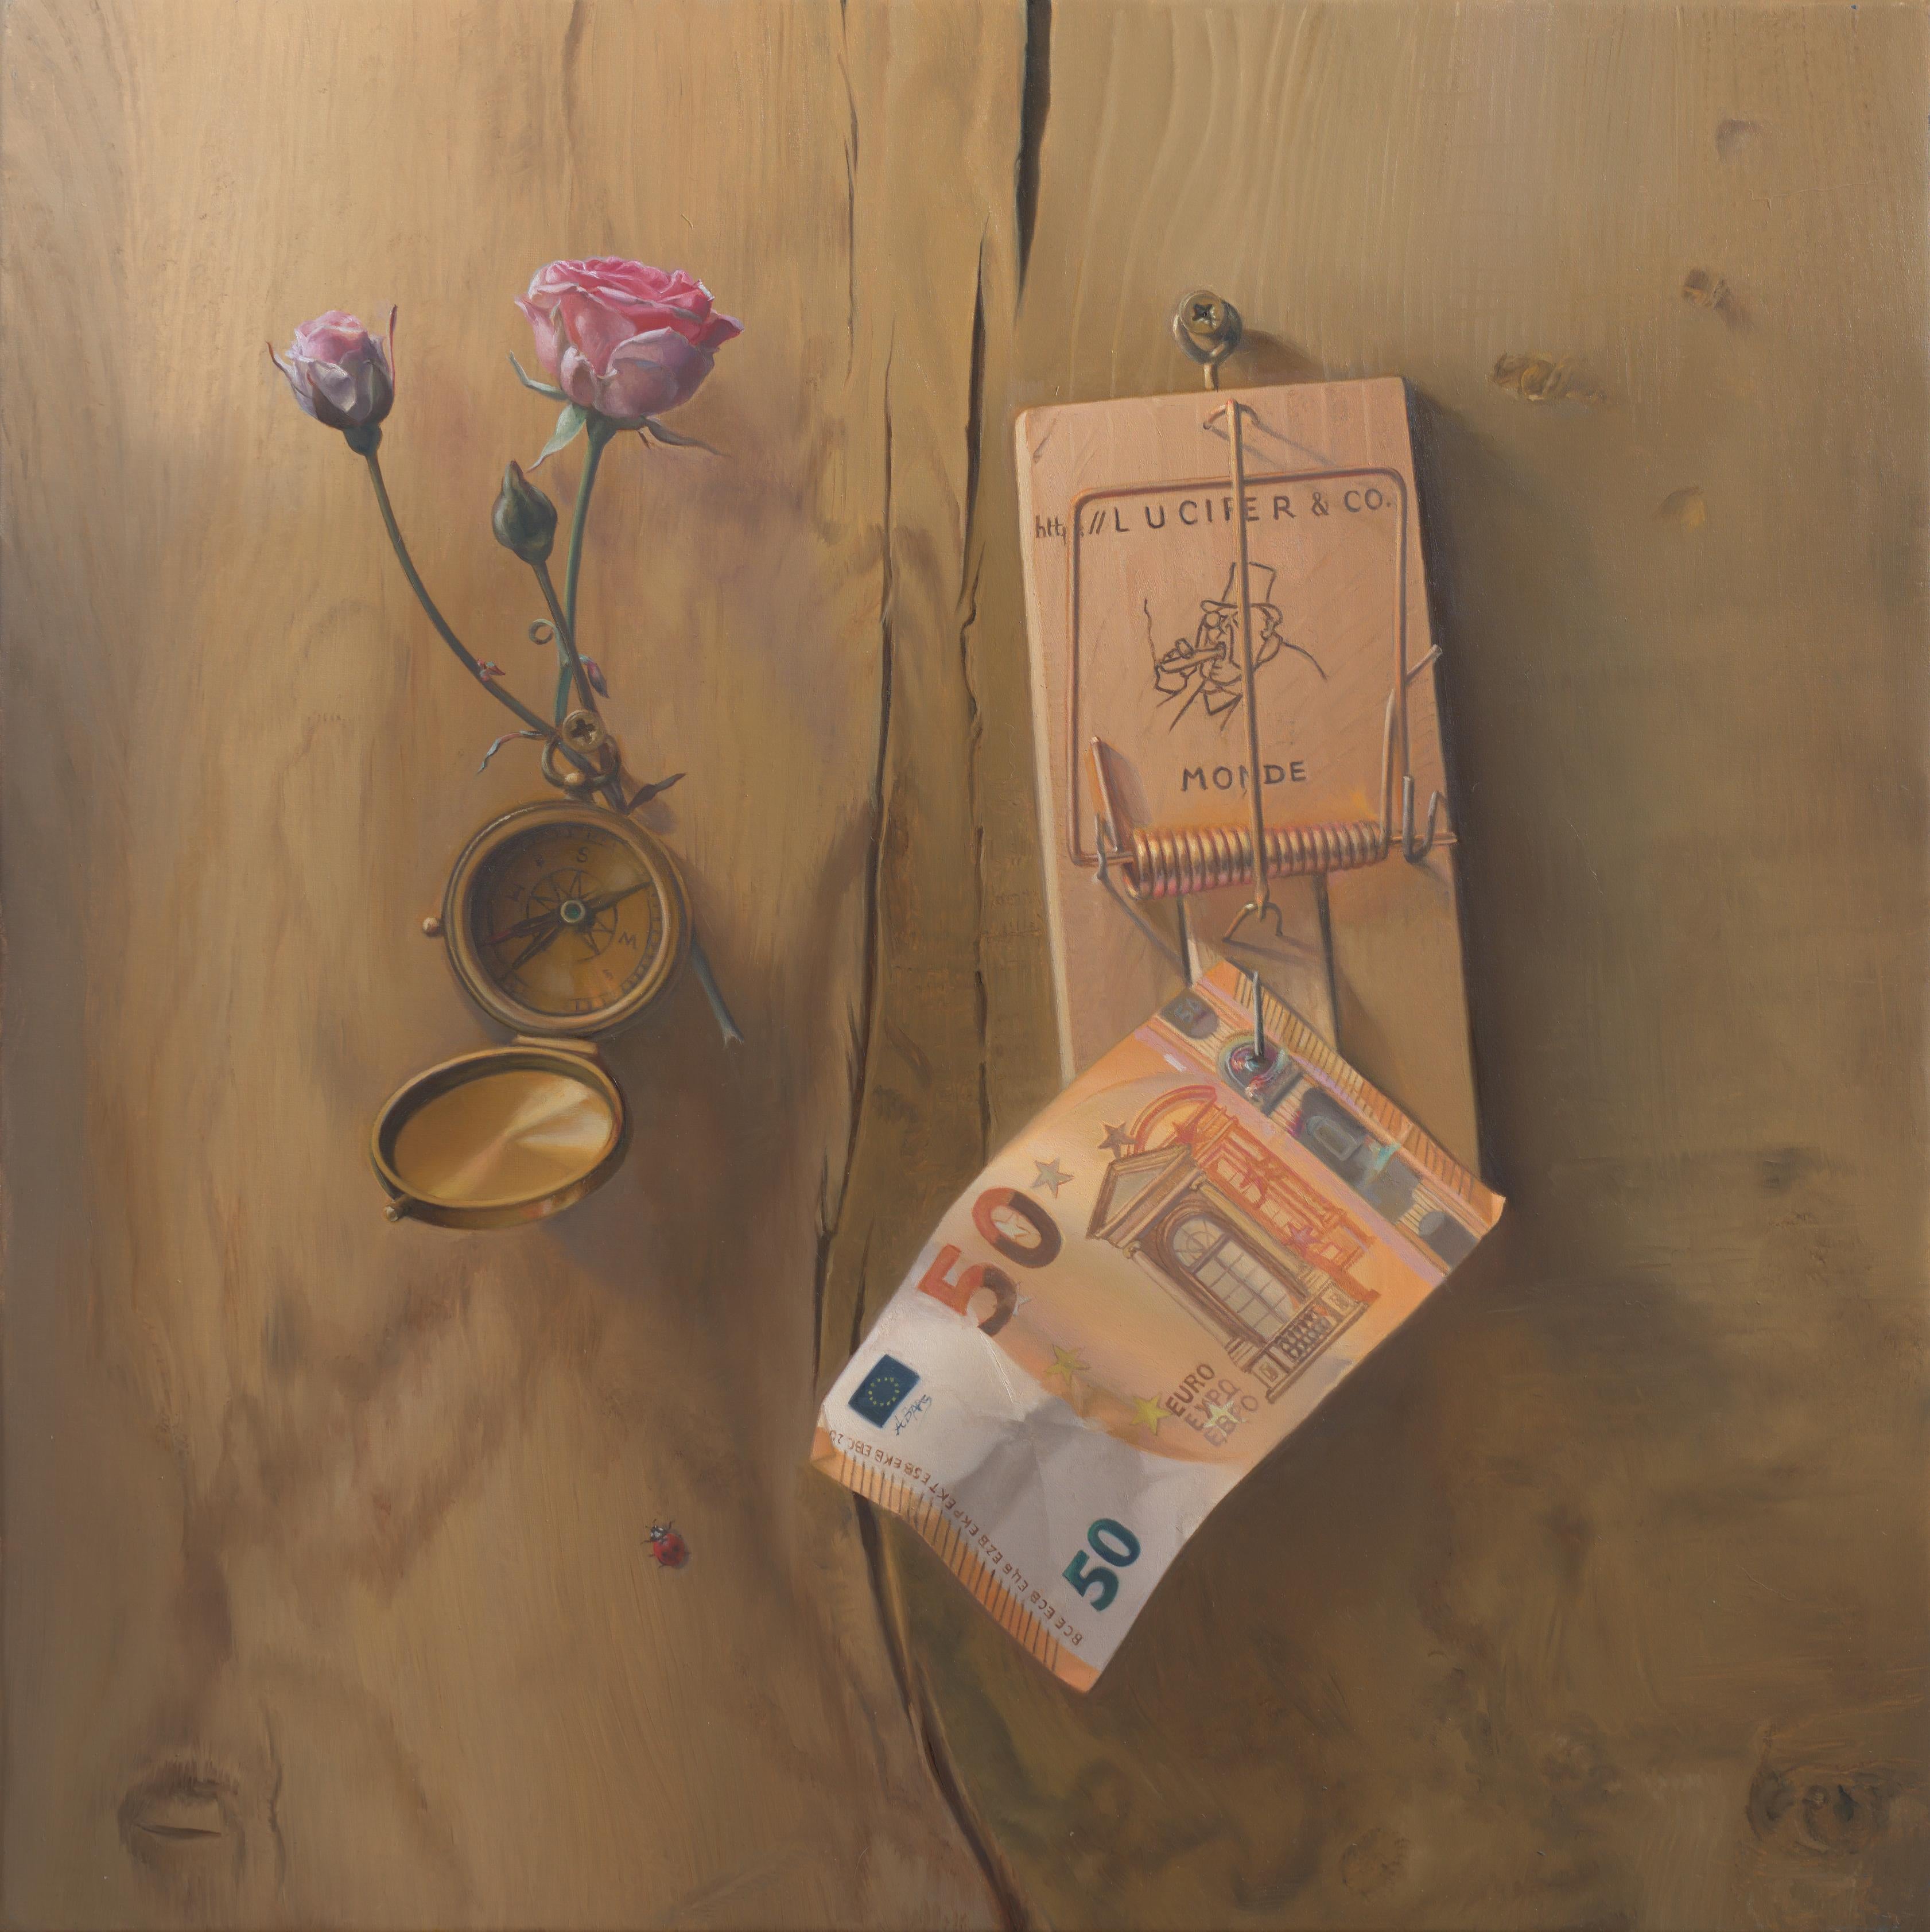 Andrée Bars Still-Life Painting - "We Lost the North", Wood Crack, Compass, Money, Flower, Symbolism Oil Painting